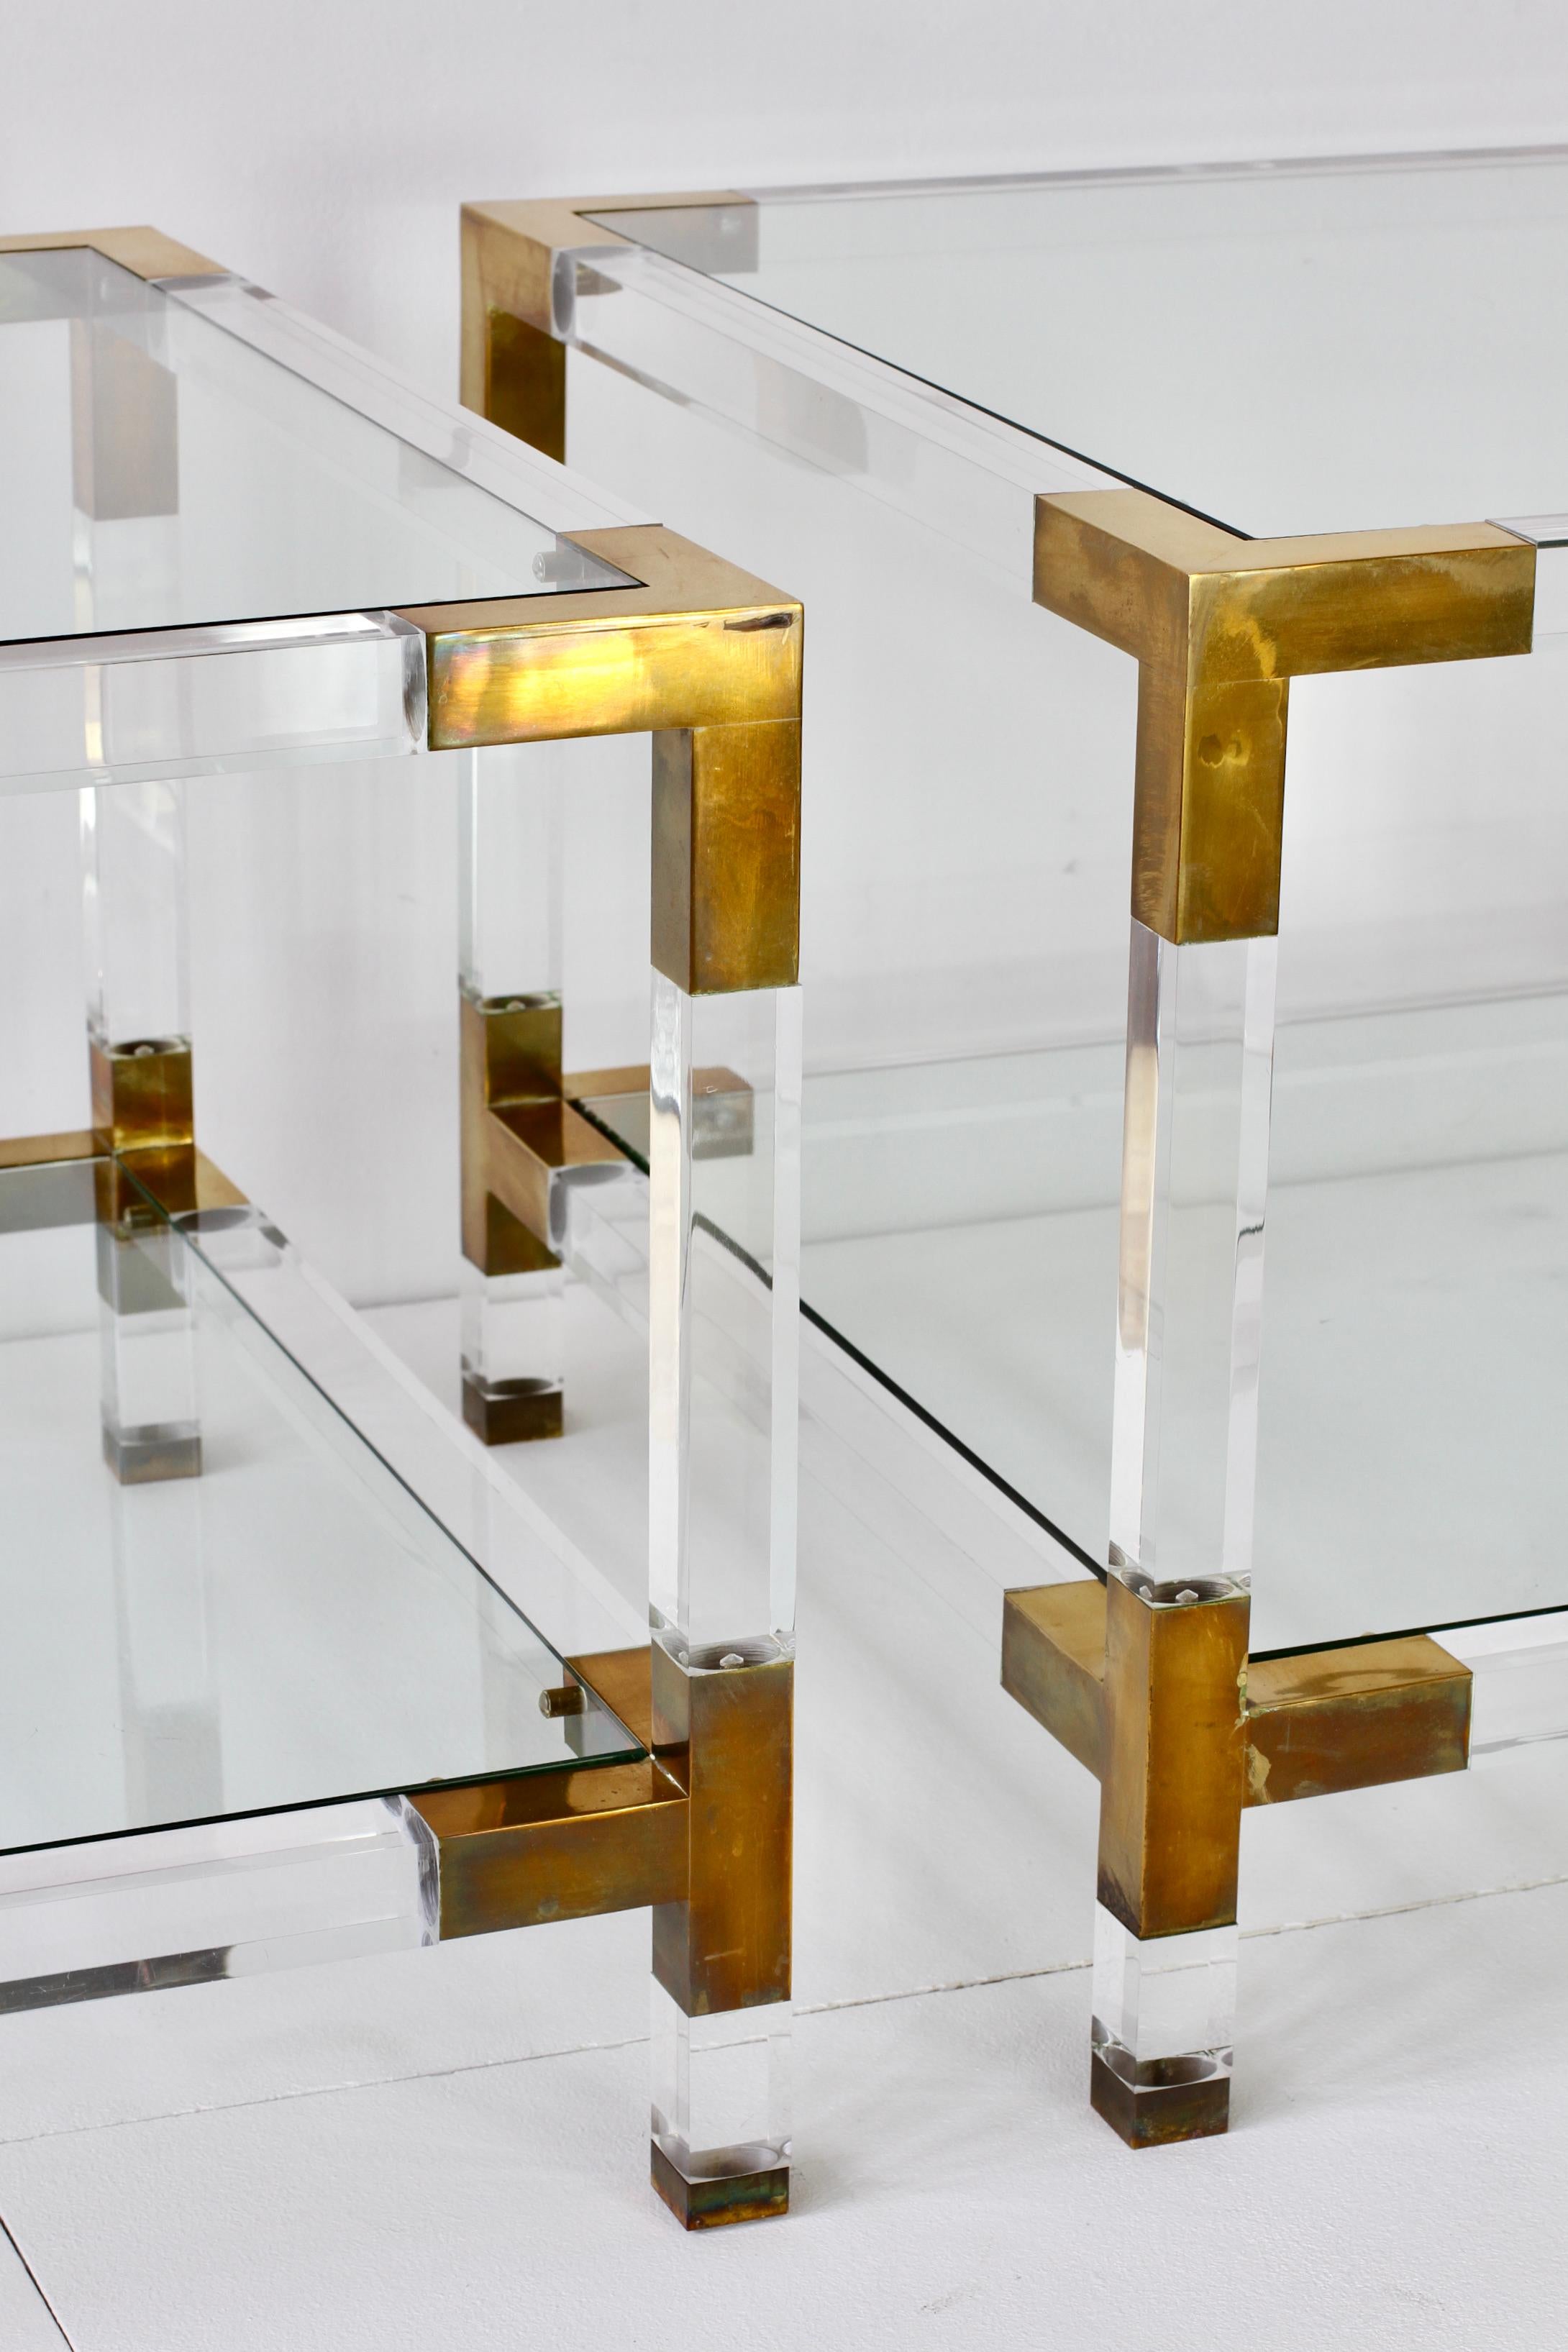 Pair of Hollis Jones Style Vintage Acrylic/Lucite Brass Side Tables, circa 1970s For Sale 1